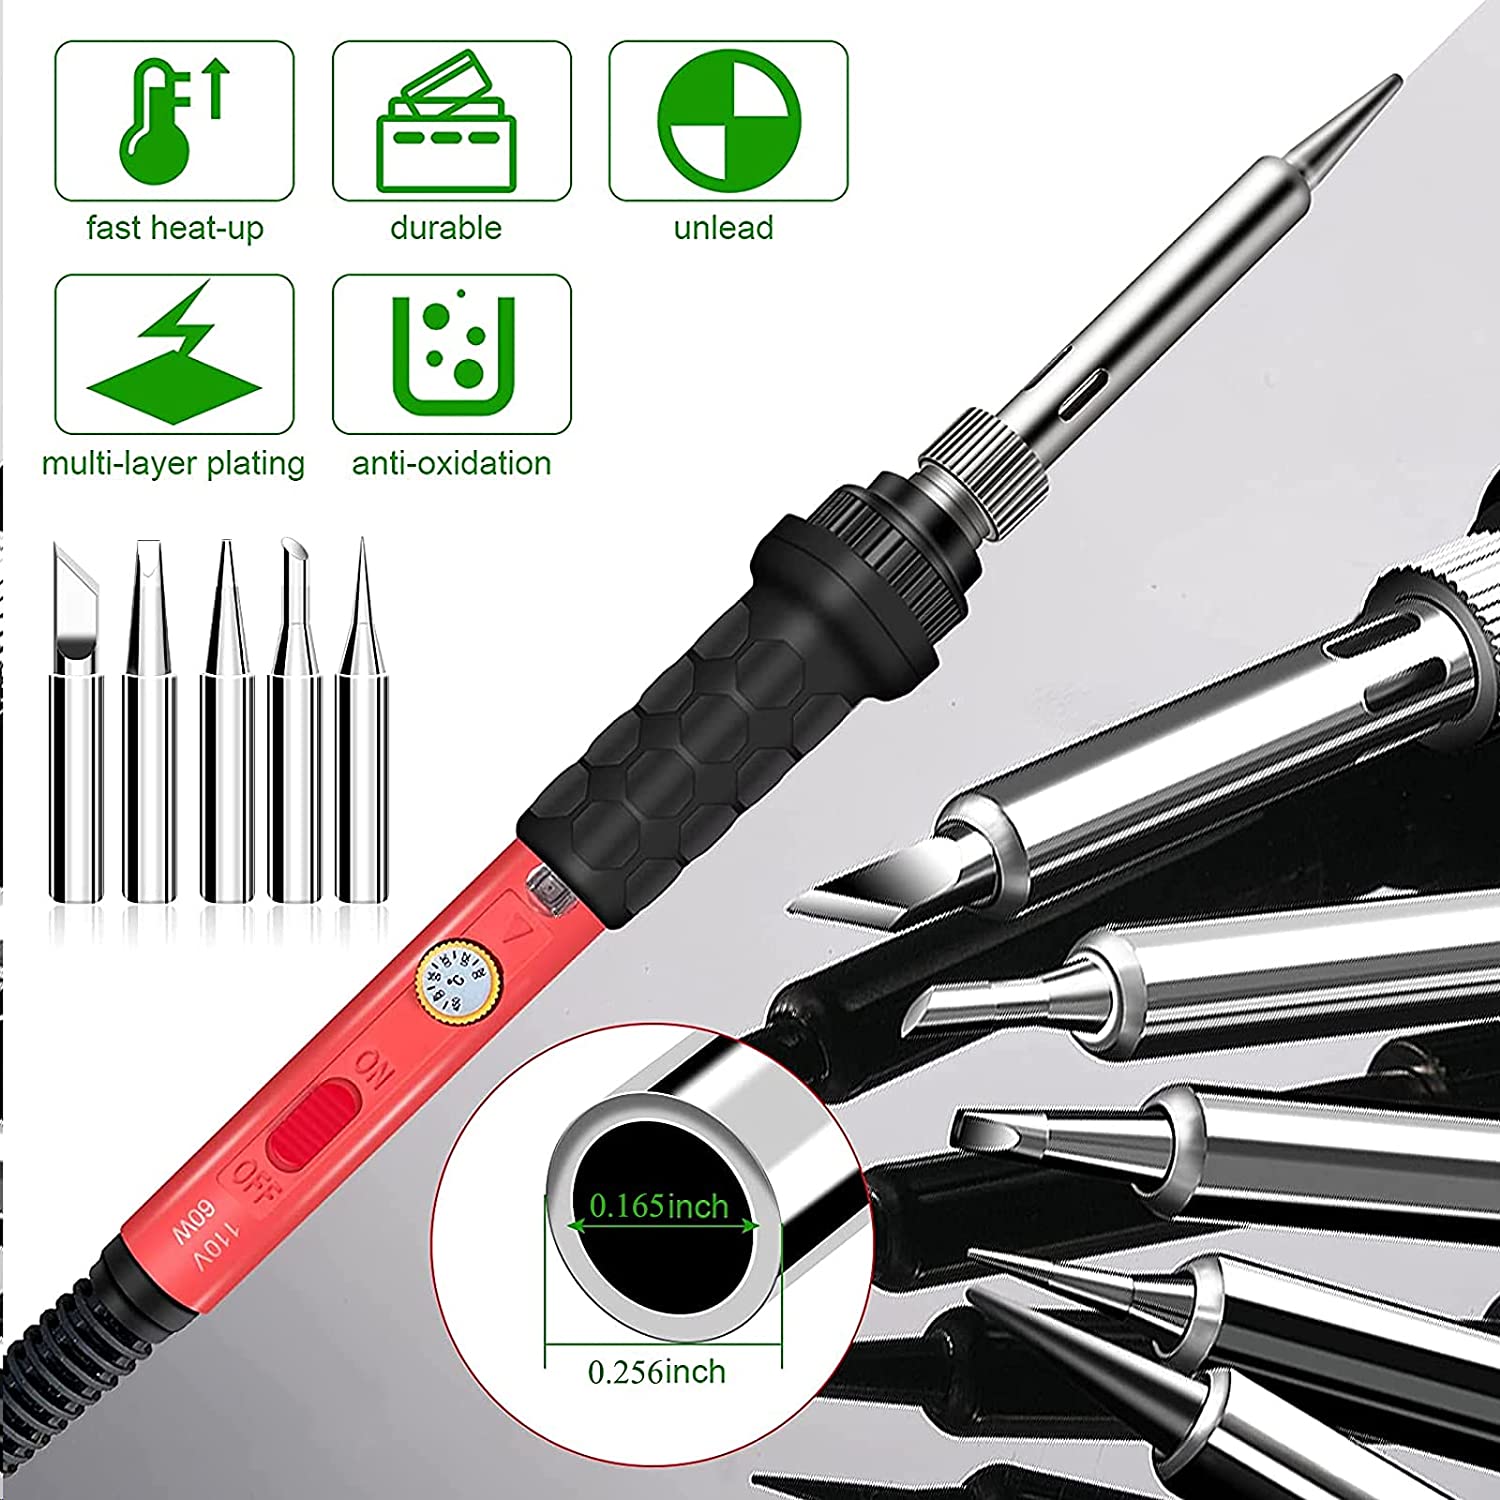 Soldering Iron Tips, 5 PCS 900M Series Solder Tips, Lead-free Replacement Welding Tips, 900M-K/2.4D/B/3C/I, for 900M solder iron/Soldering Station